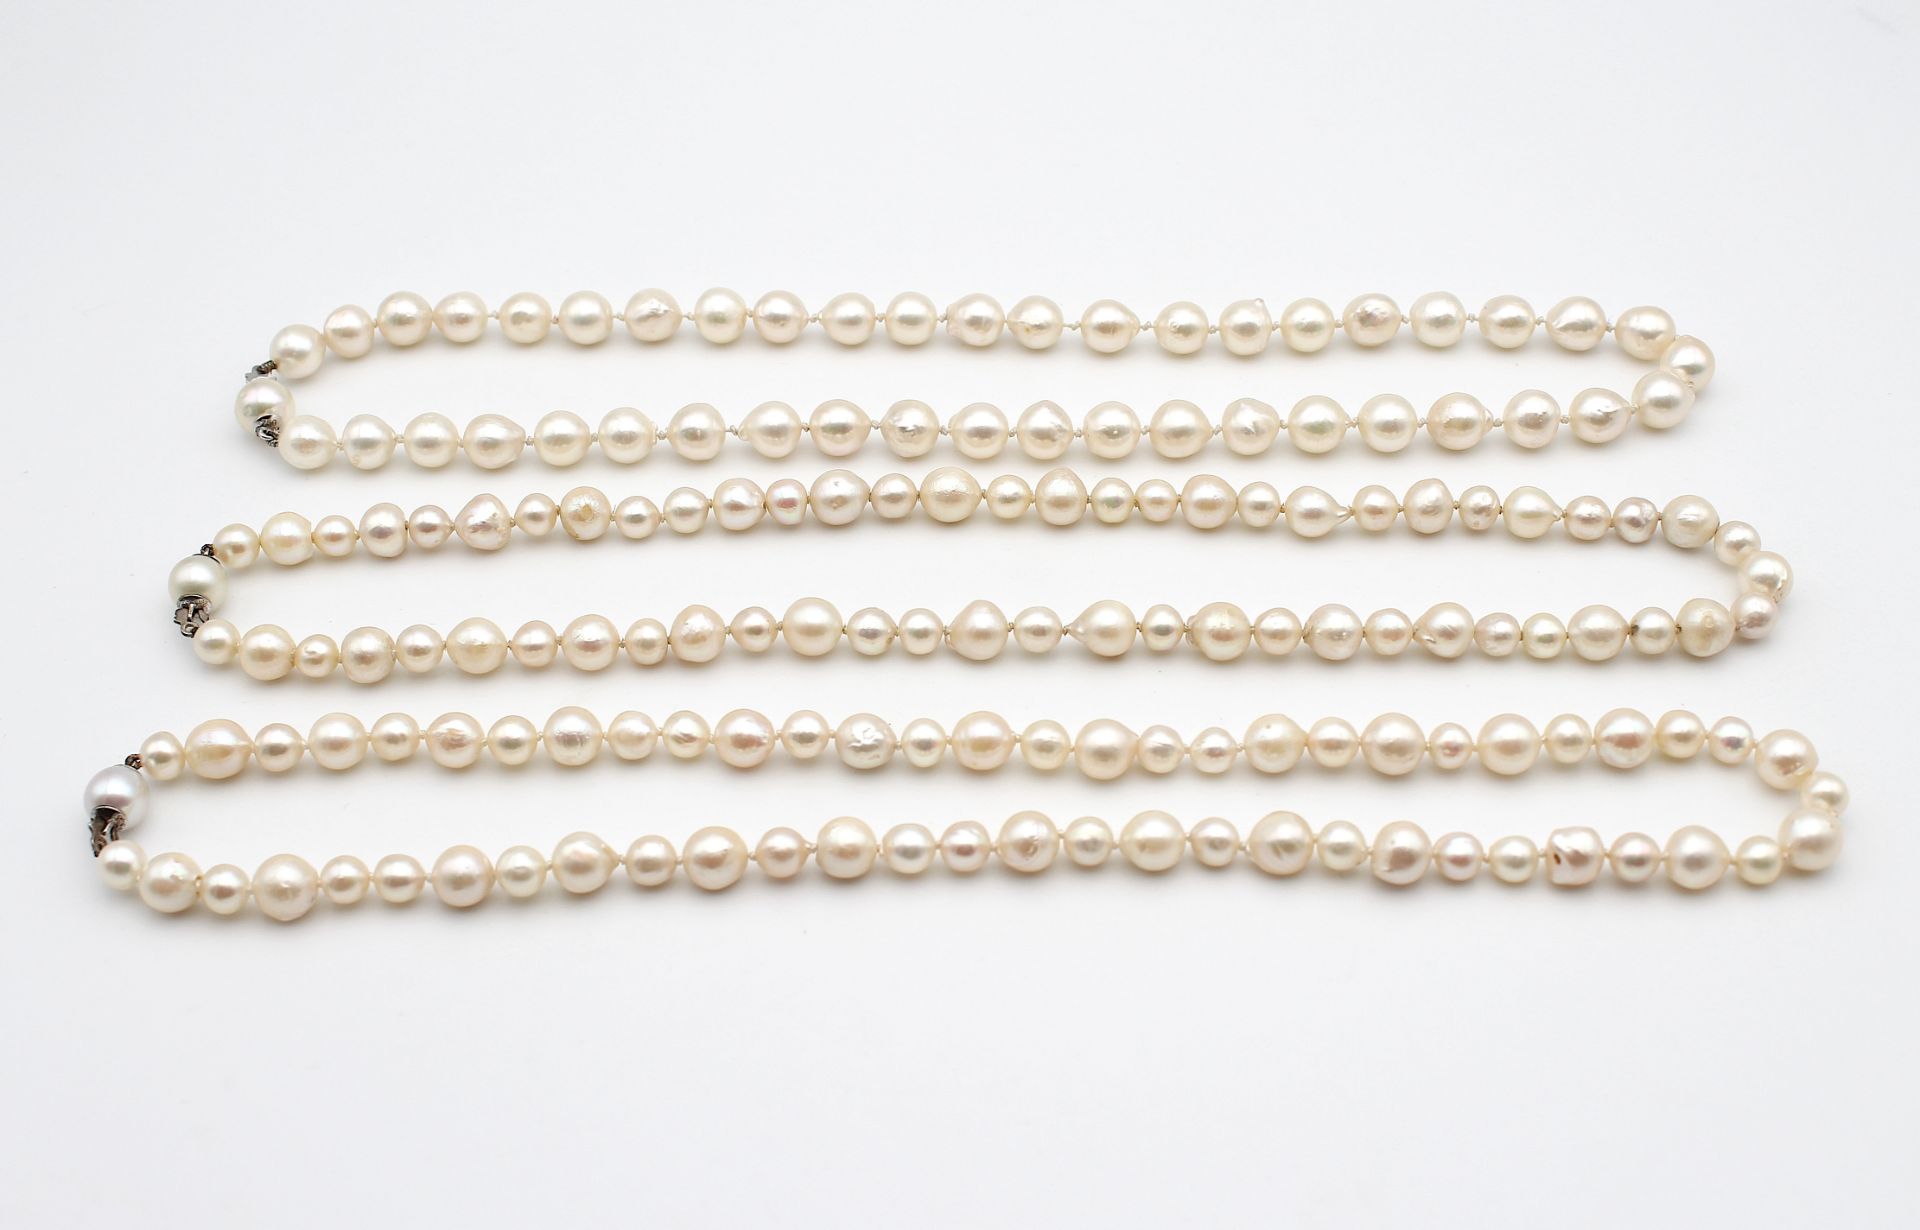 3 simple cultured pearl necklaces - Image 2 of 3